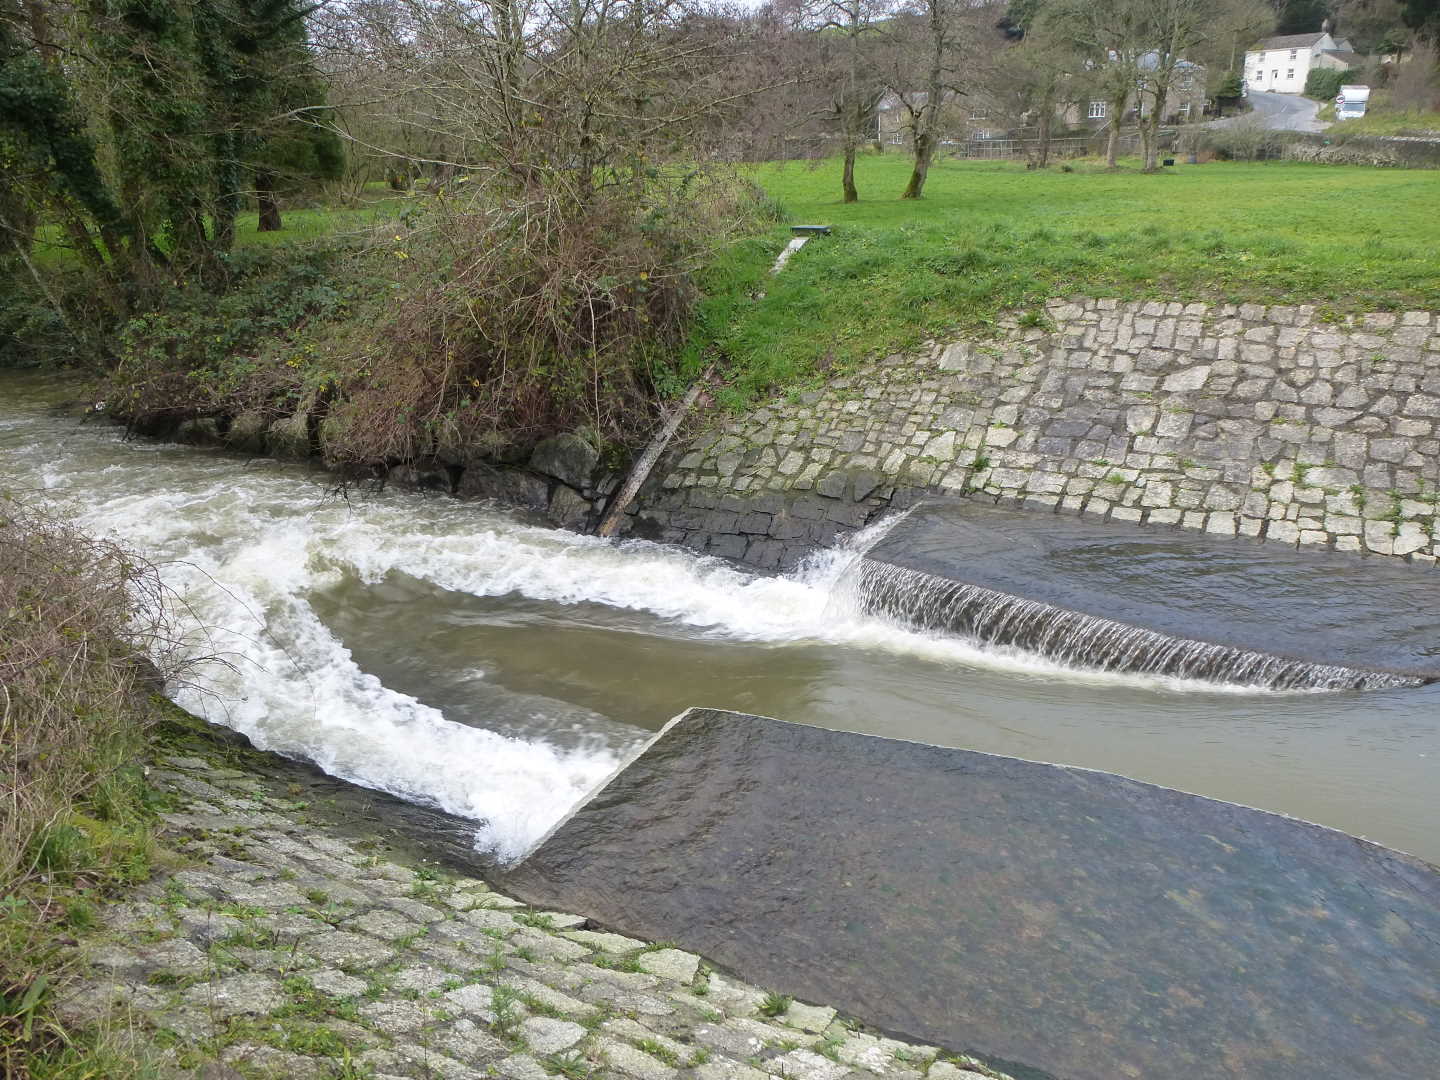 A view of the weir